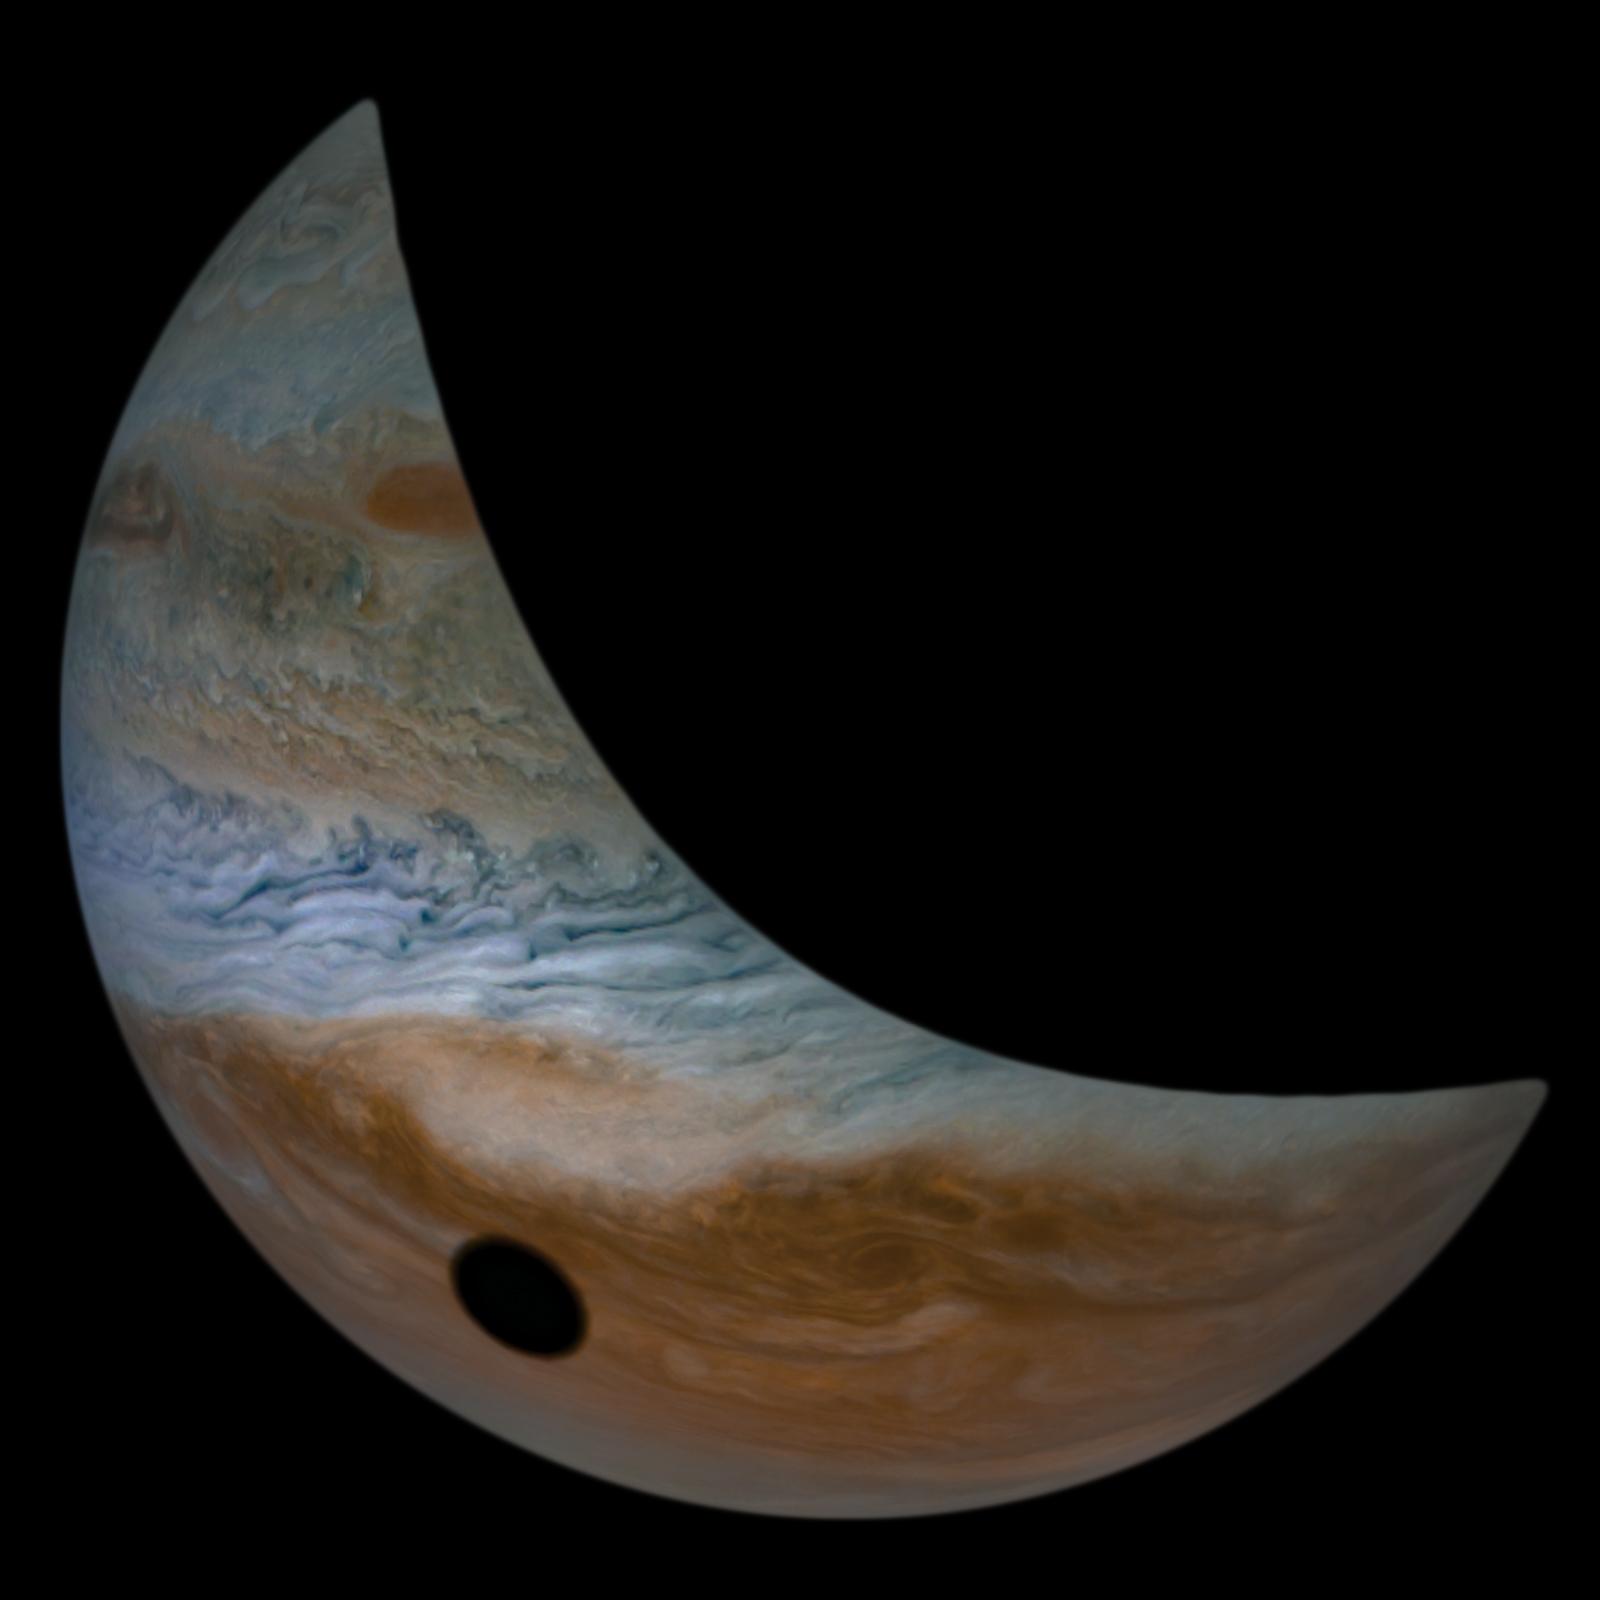 PIA23602: The Shadow of Io